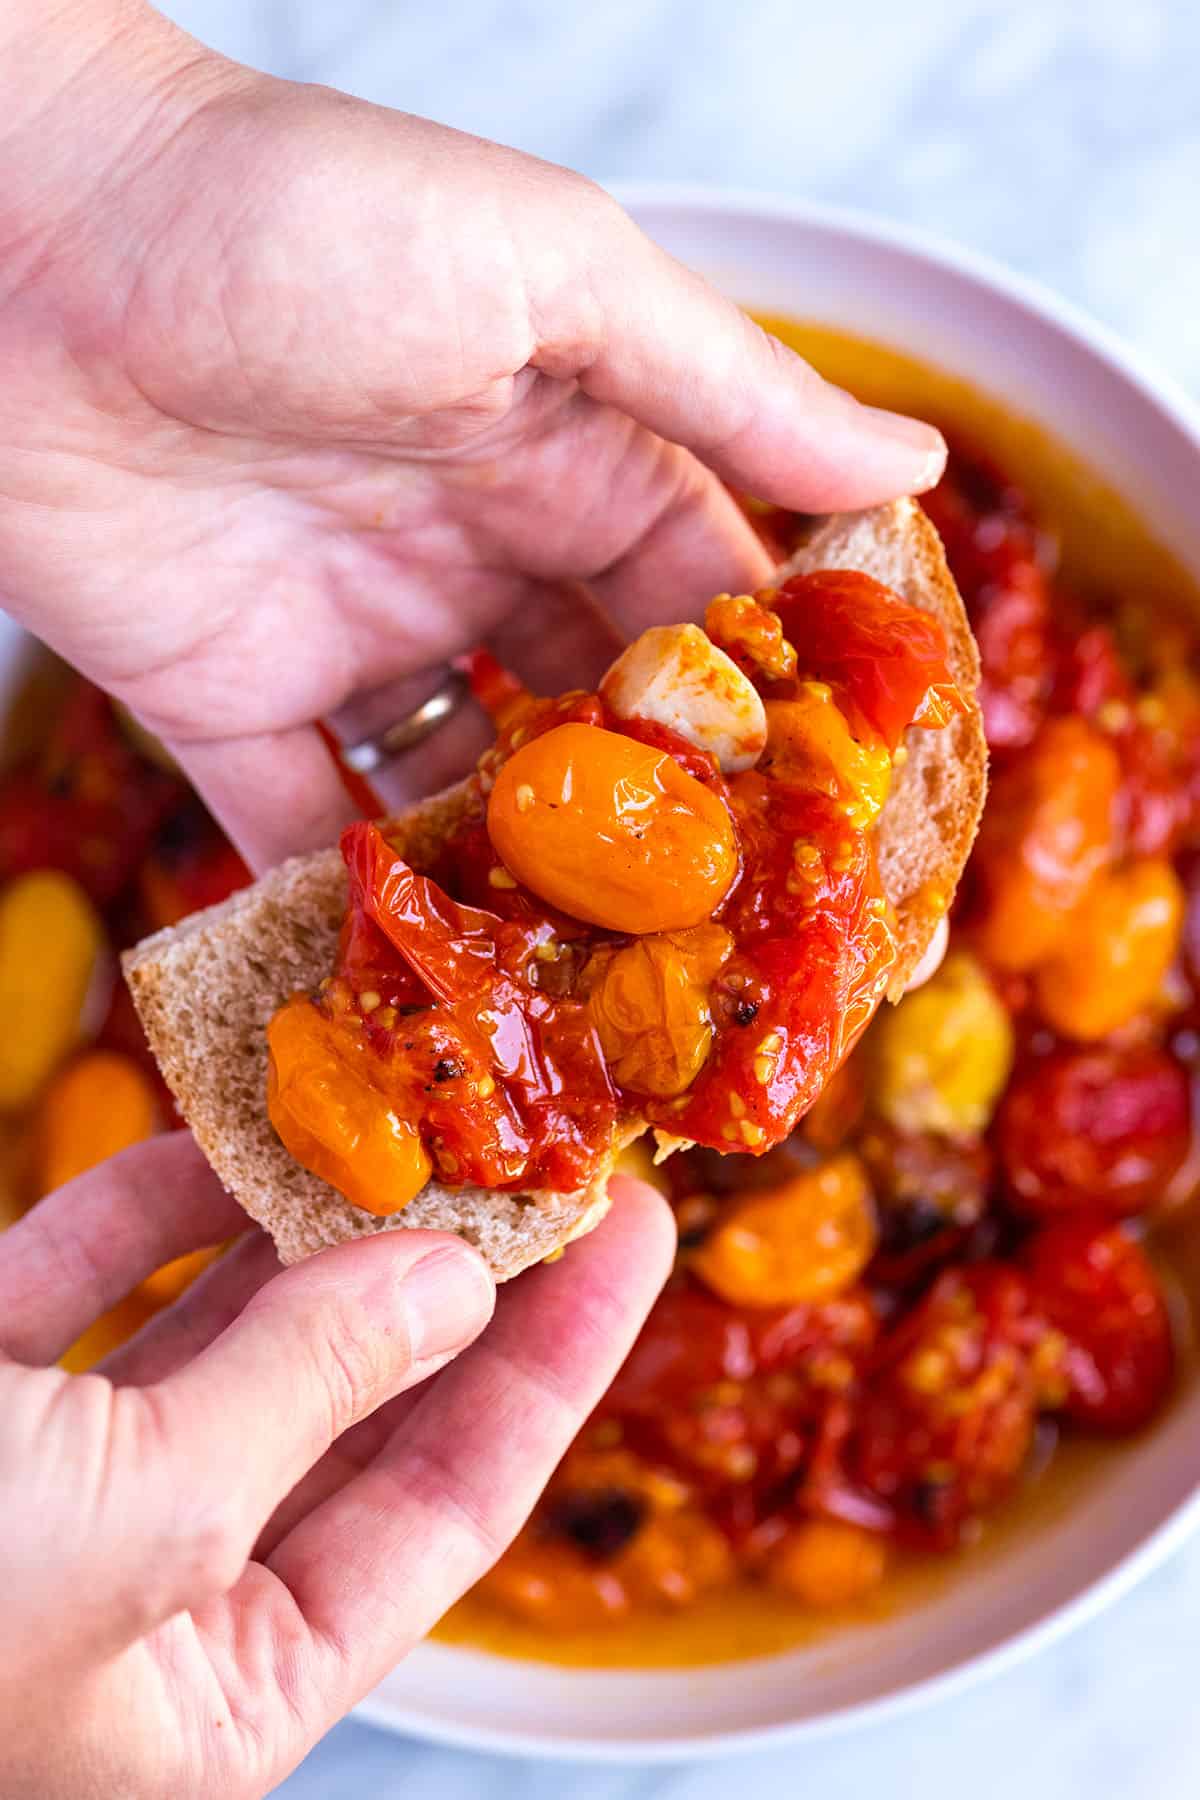 Roasted tomatoes spread onto a slice of bread